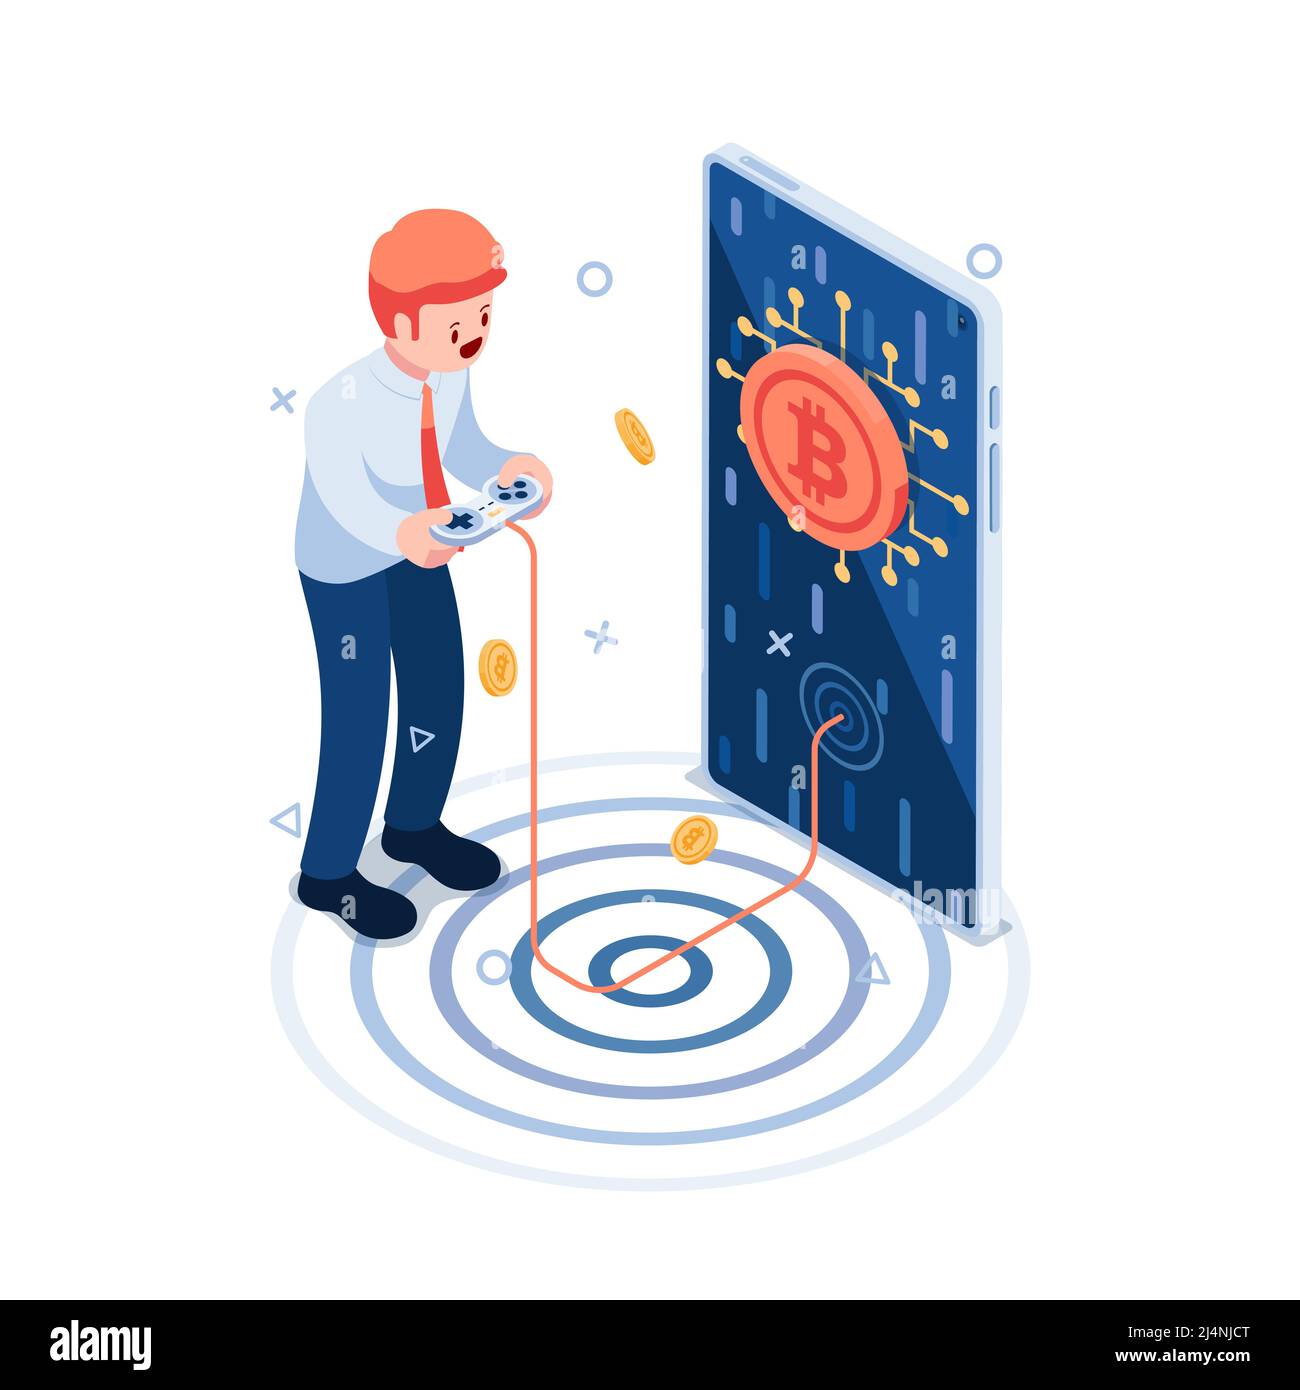 Flat 3d Isometric Businessman Playing Crypto Games on Smartphone. Play to Earn and Cryptocurrency Concept. Stock Vector